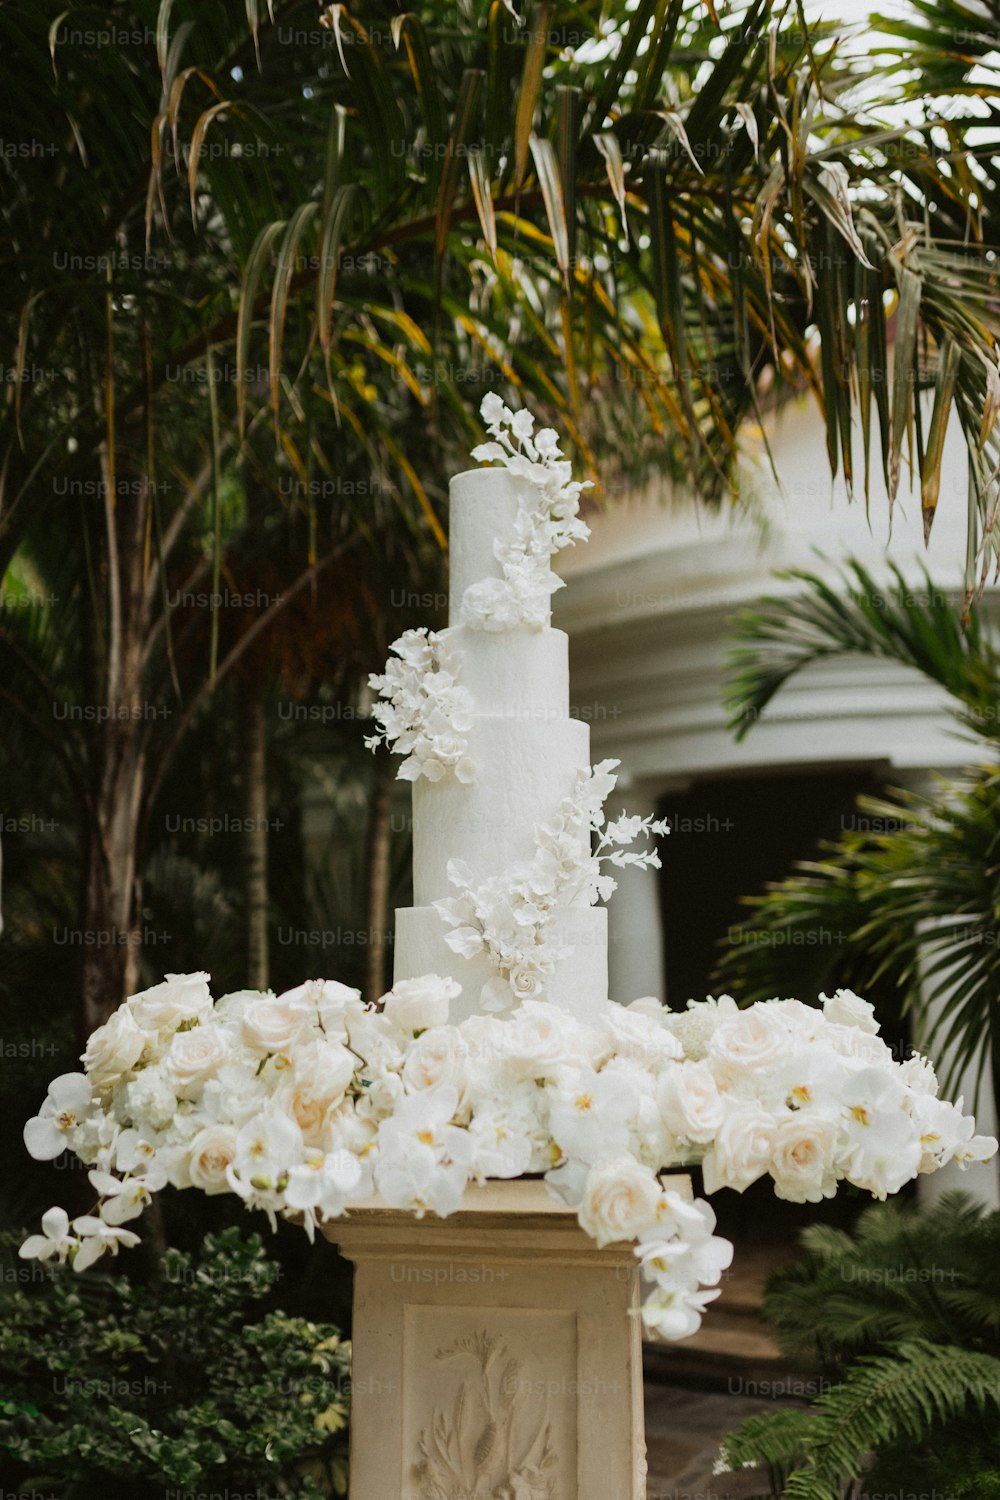 a wedding cake with white flowers on a pedestal